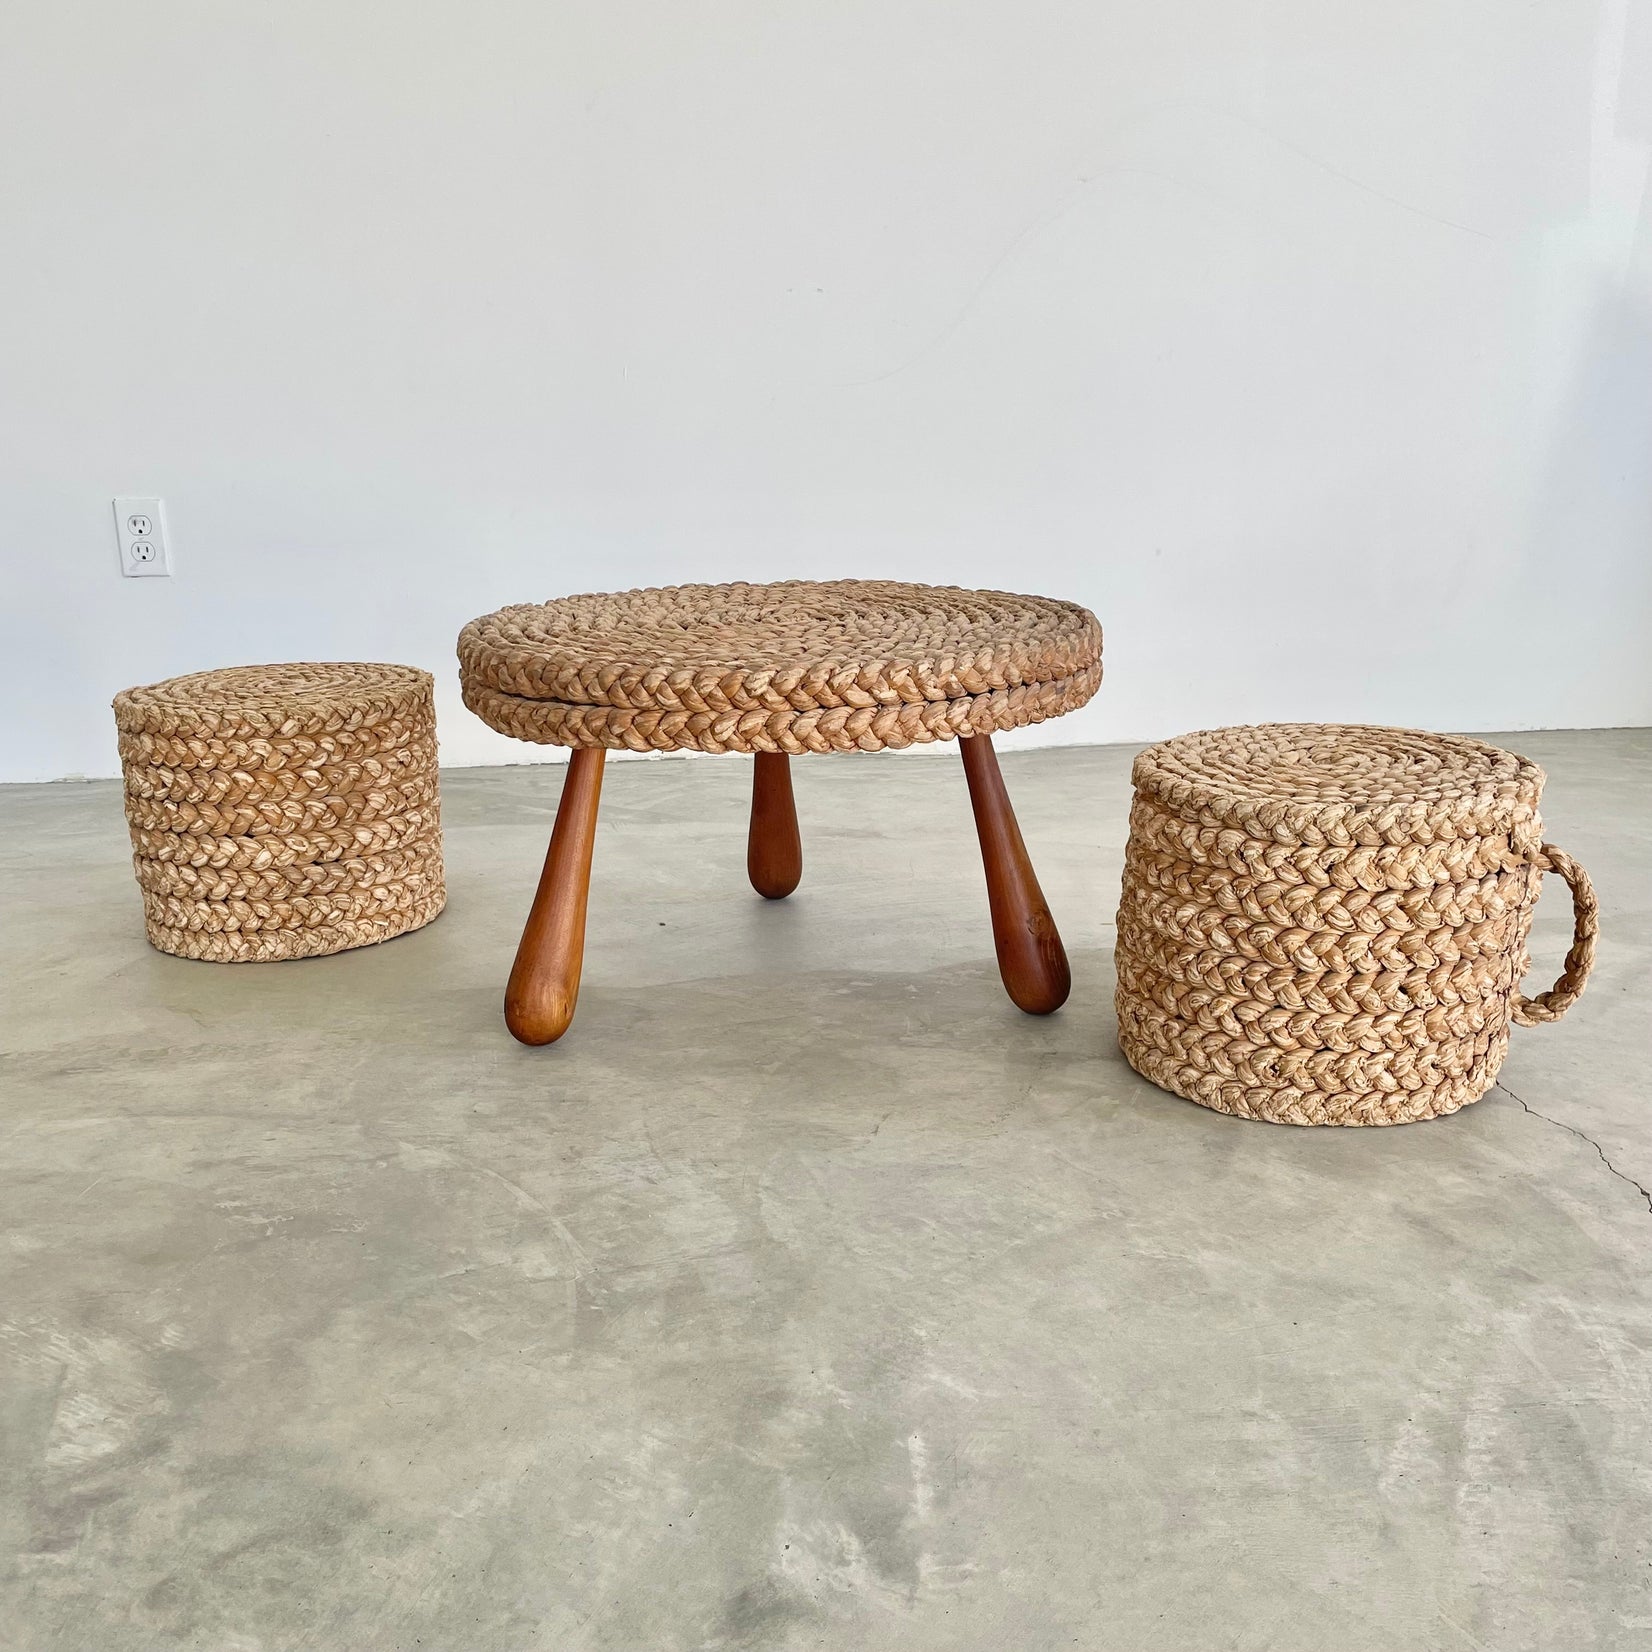 Rope and Wood Table with Two Nesting Stools, 1960s France